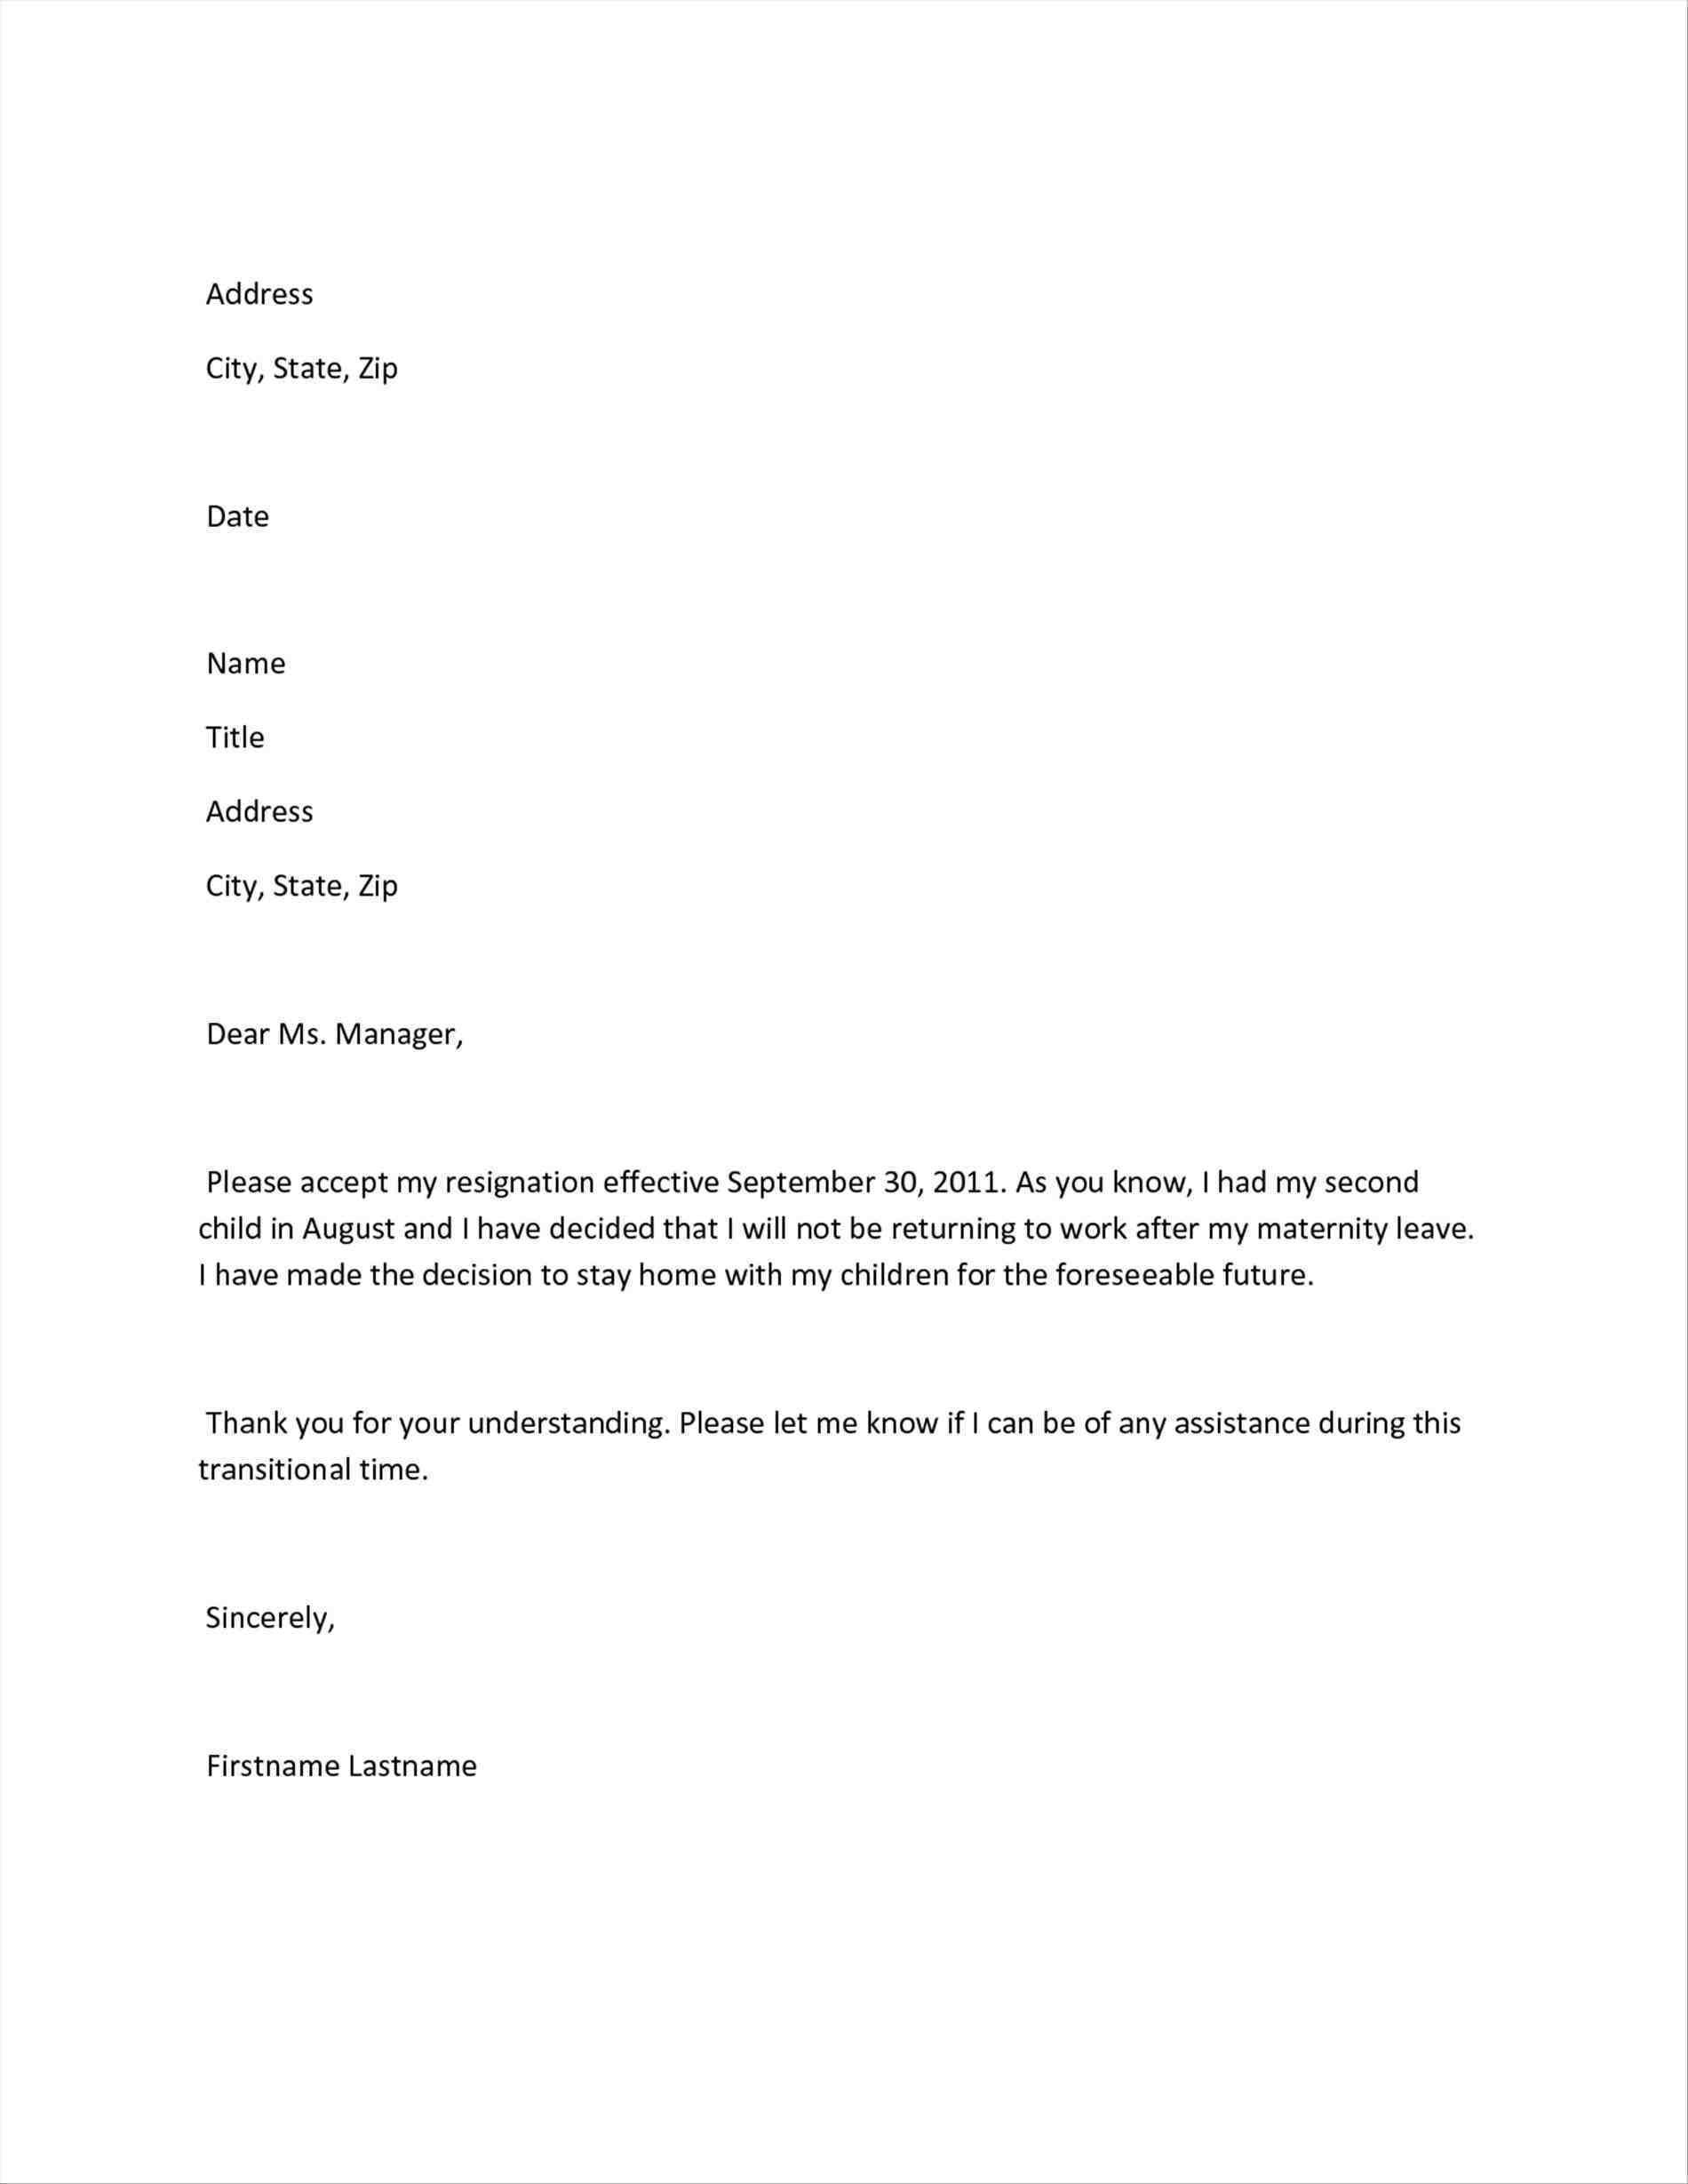 Sample Letter to Resume Work after Leave Leave From Work Letter – Rectangle Circle